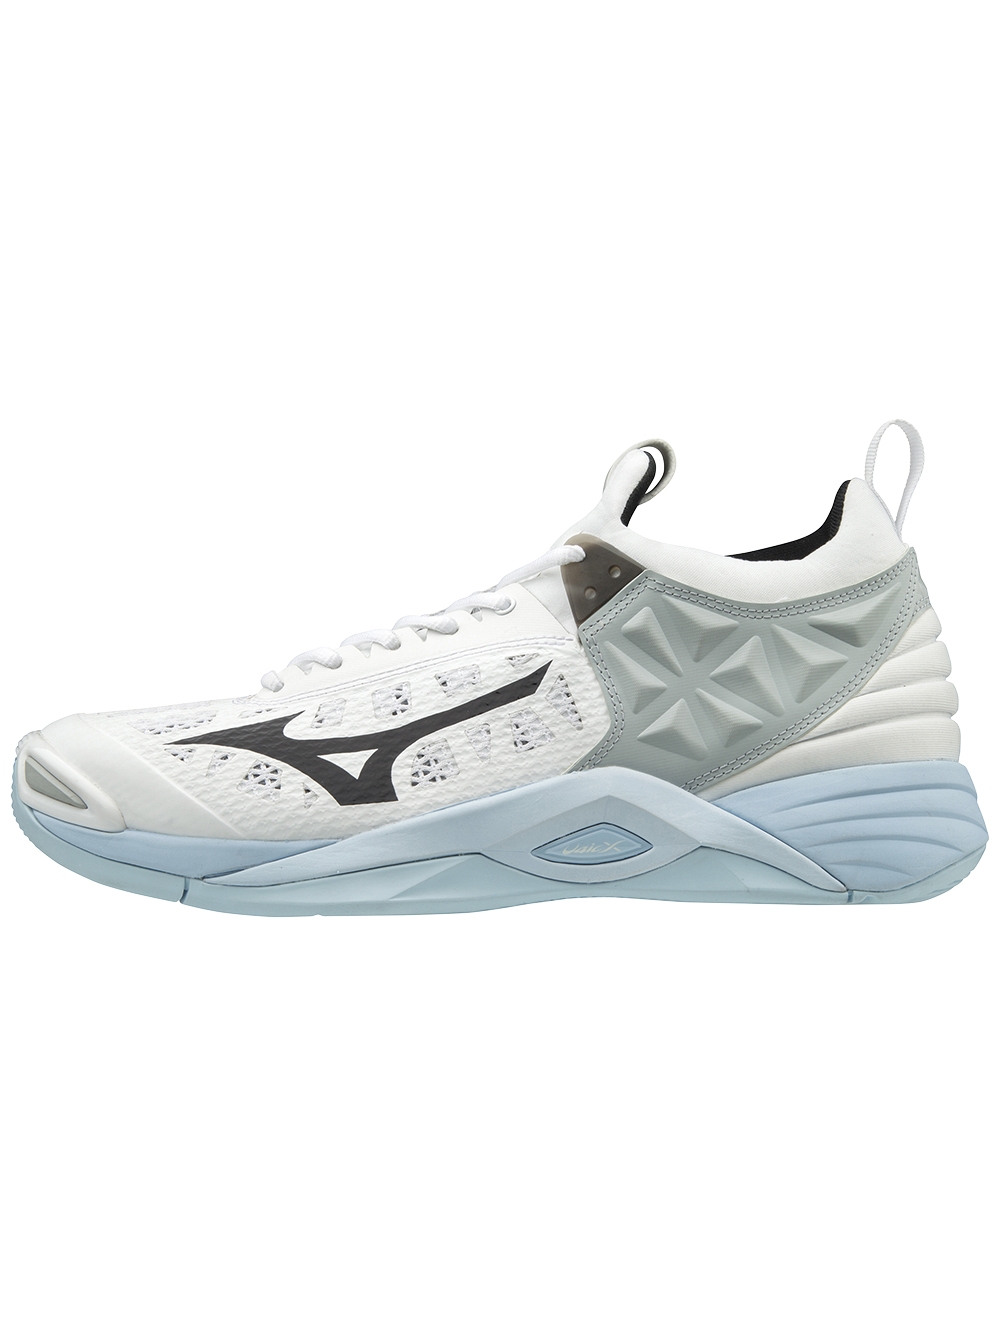 where can i buy mizuno volleyball shoes